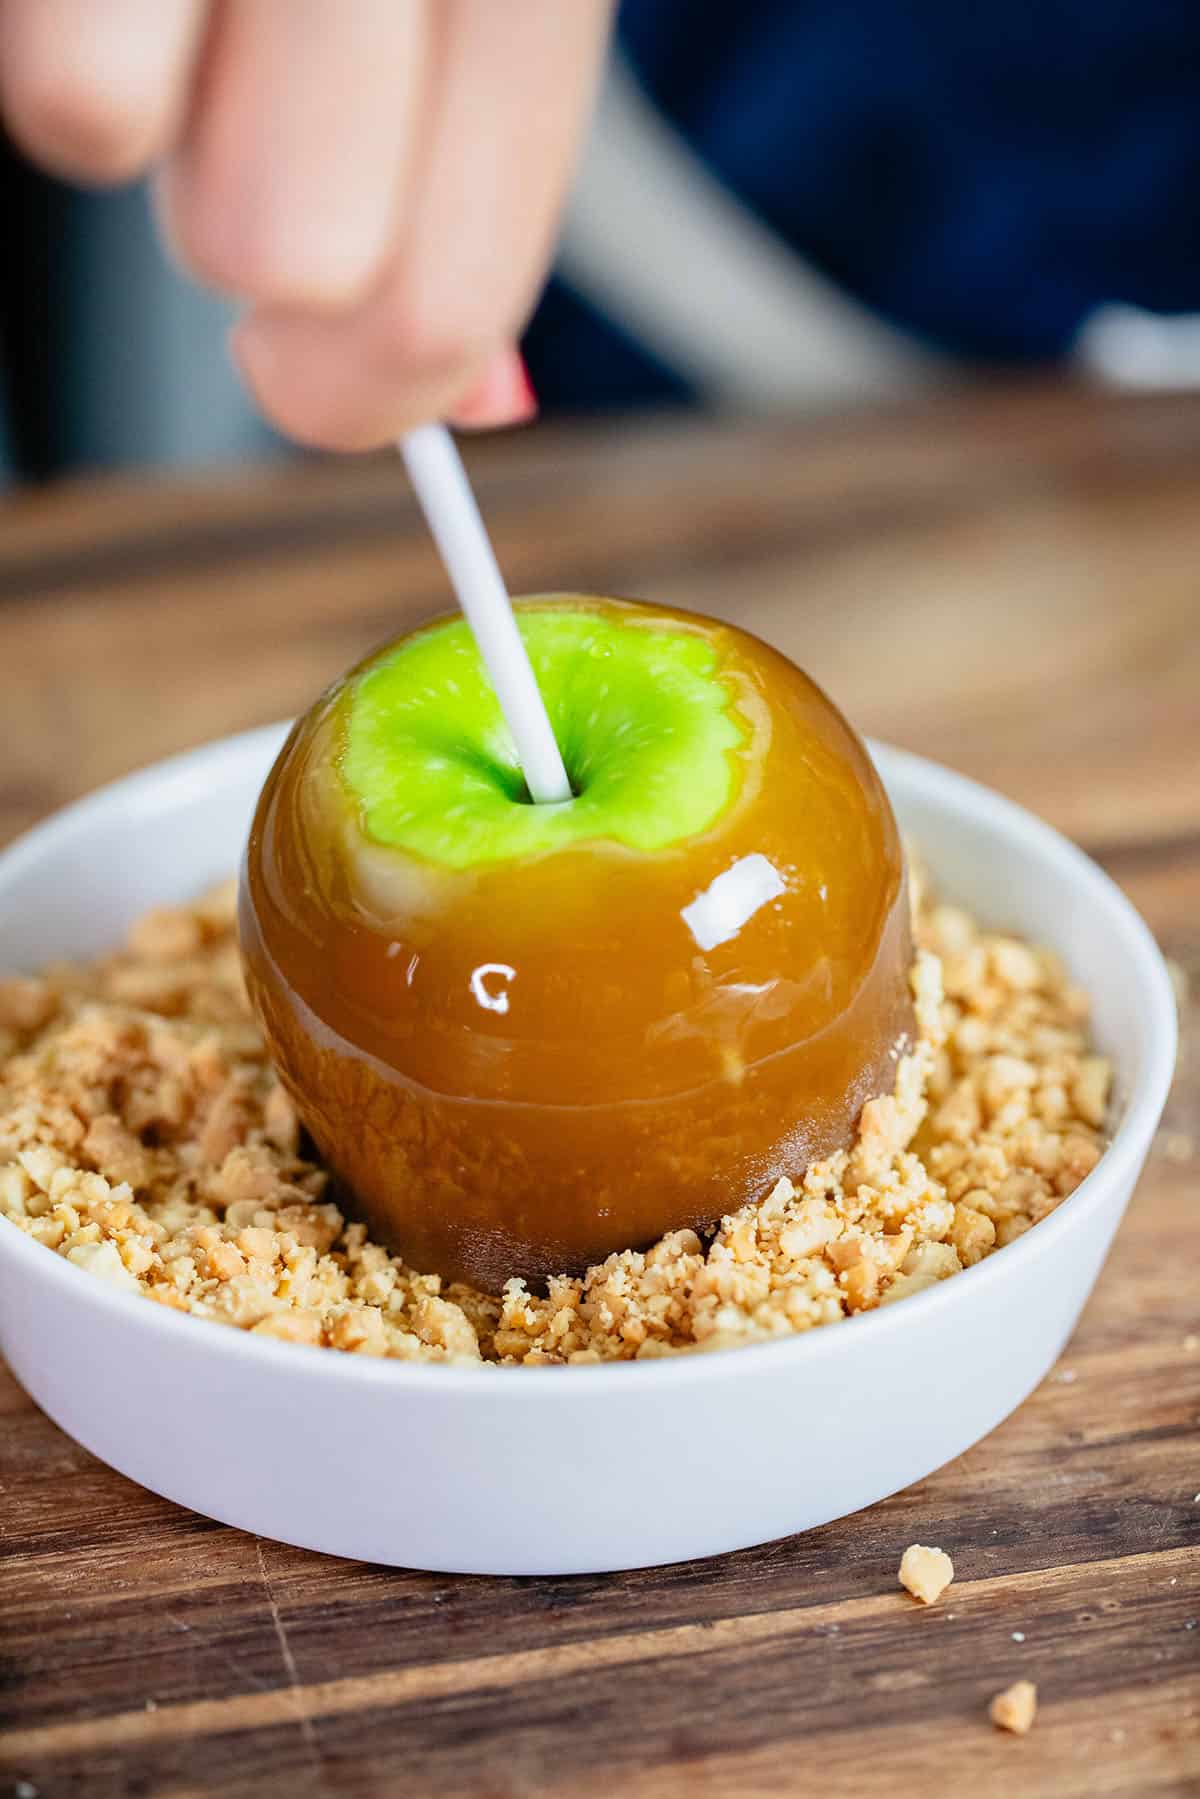 caramel apple being dipped into crushed peanuts